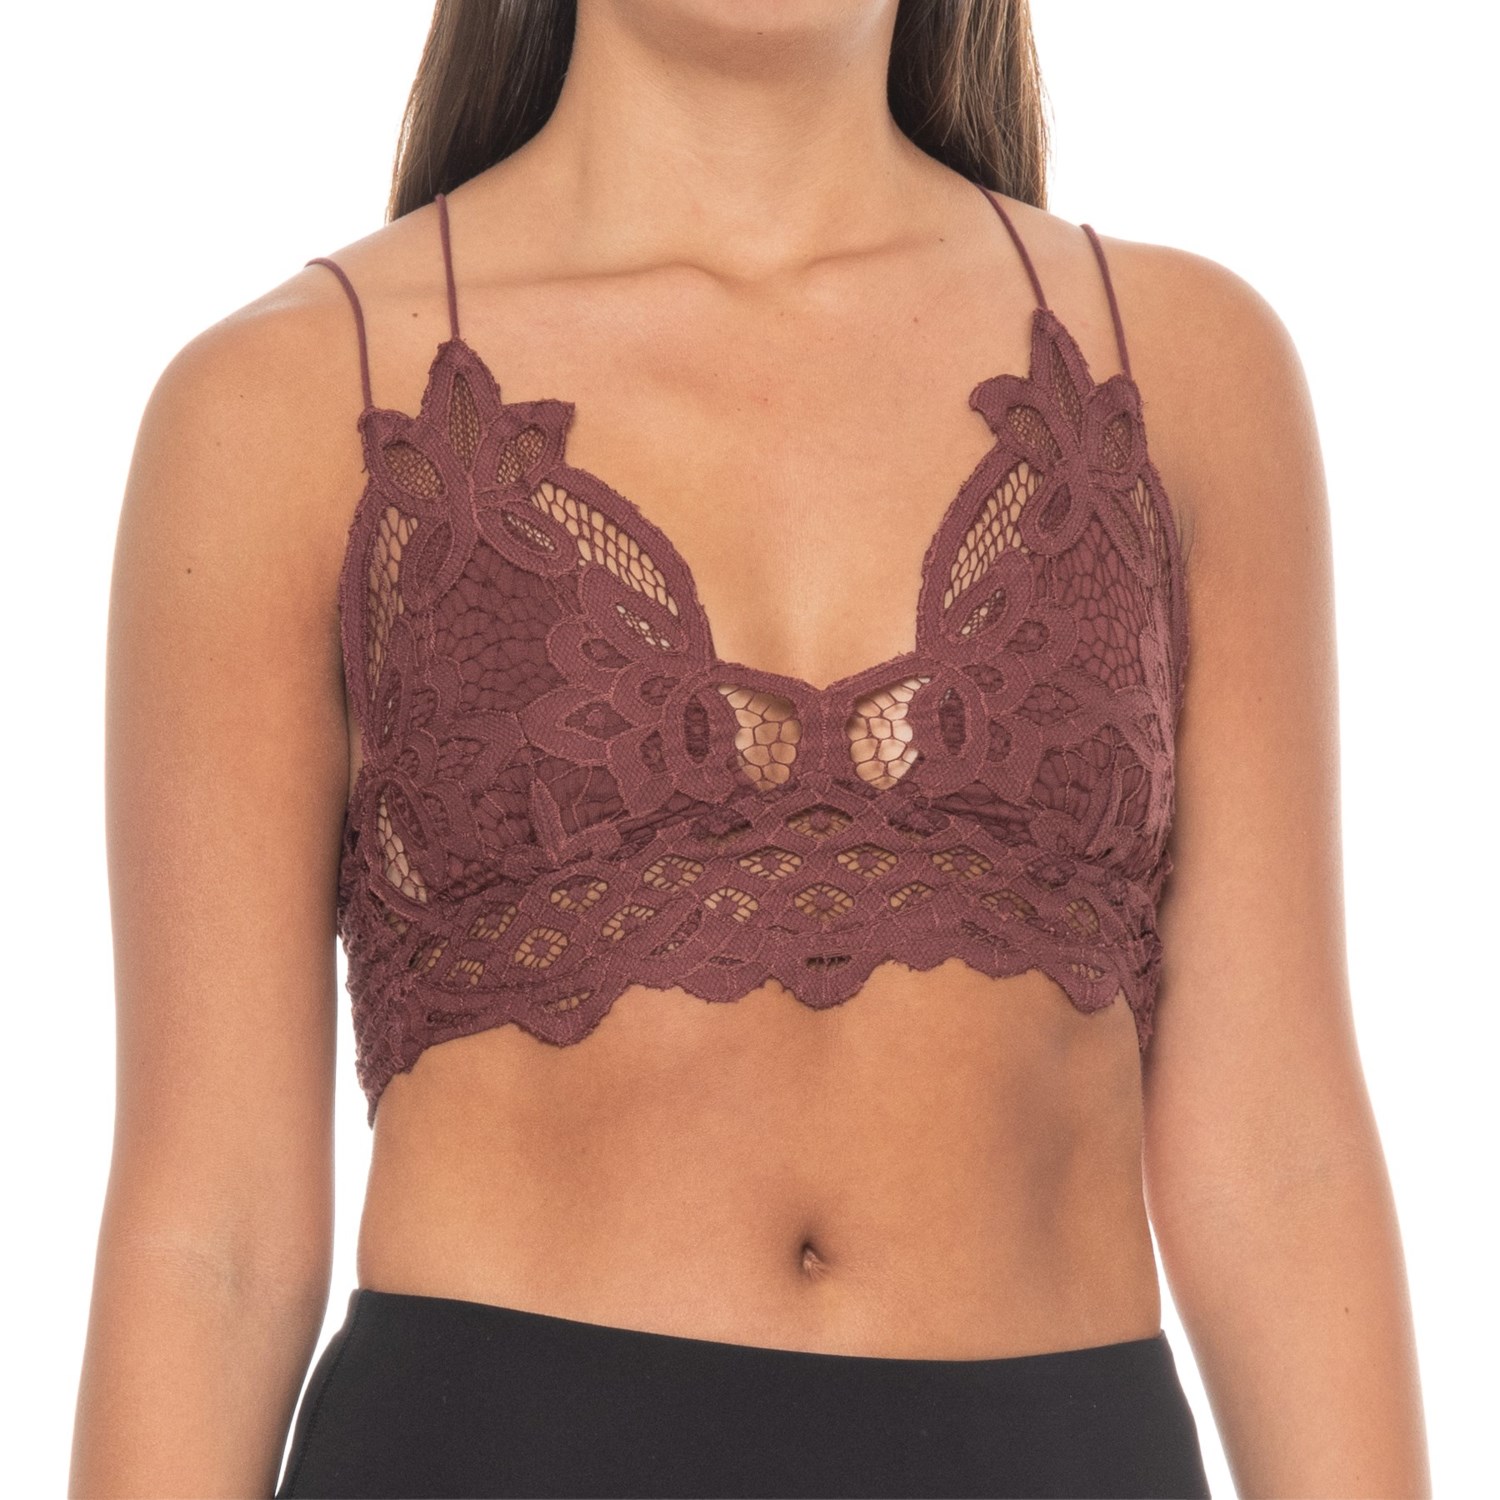 Free People - One Adella Bralette now available in 7 different colour ways!  //